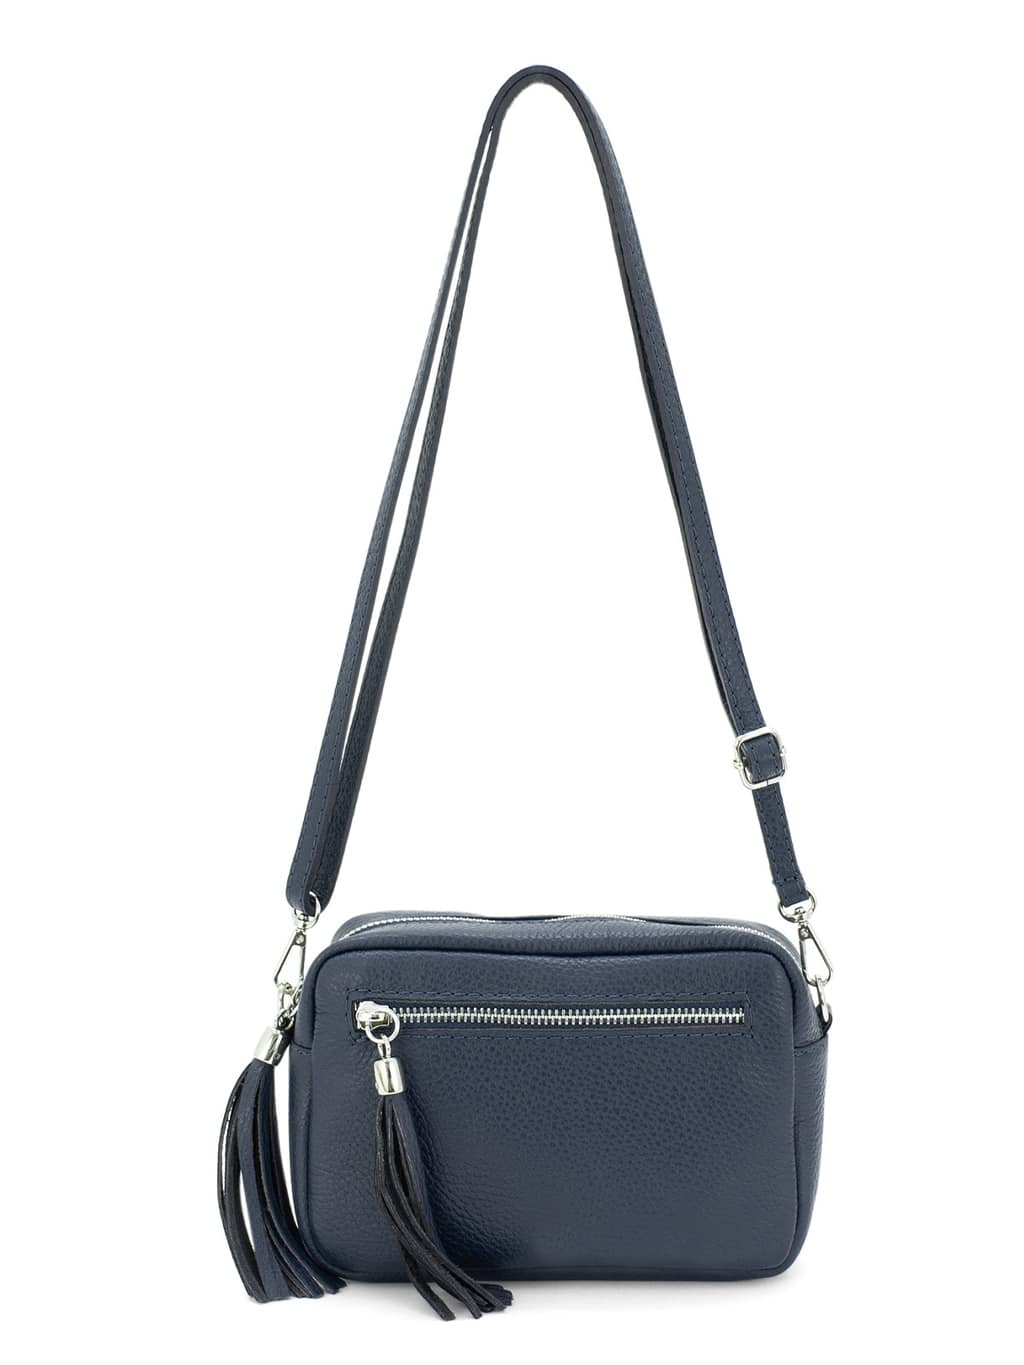 box bag navy with strap